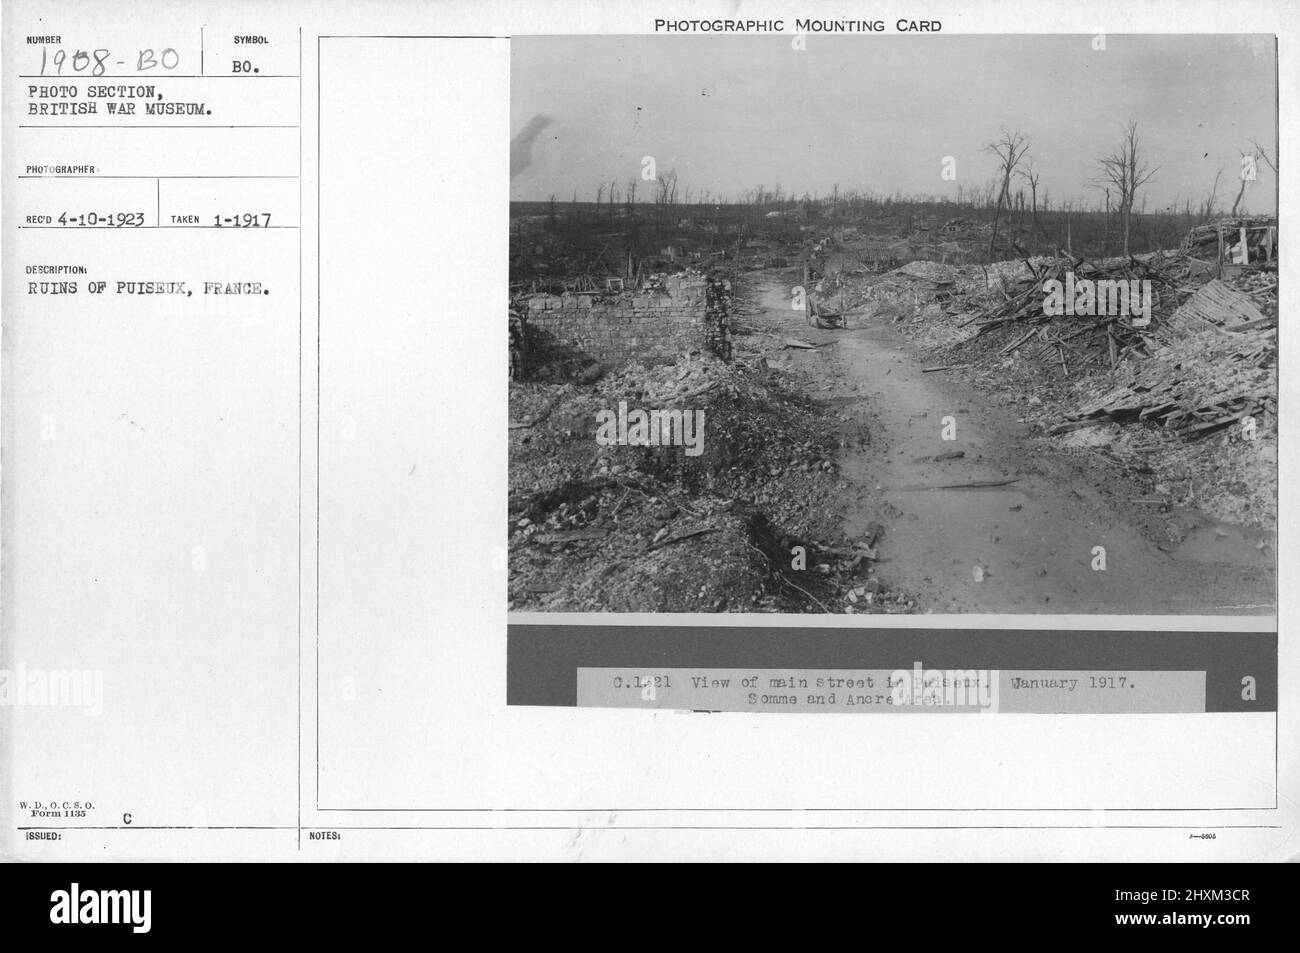 Ruins of Puiseux, France. Collection of World War I Photographs, 1914-1918 that depict the military activities of British and other nation's armed forces and personnel during World War I. Stock Photo